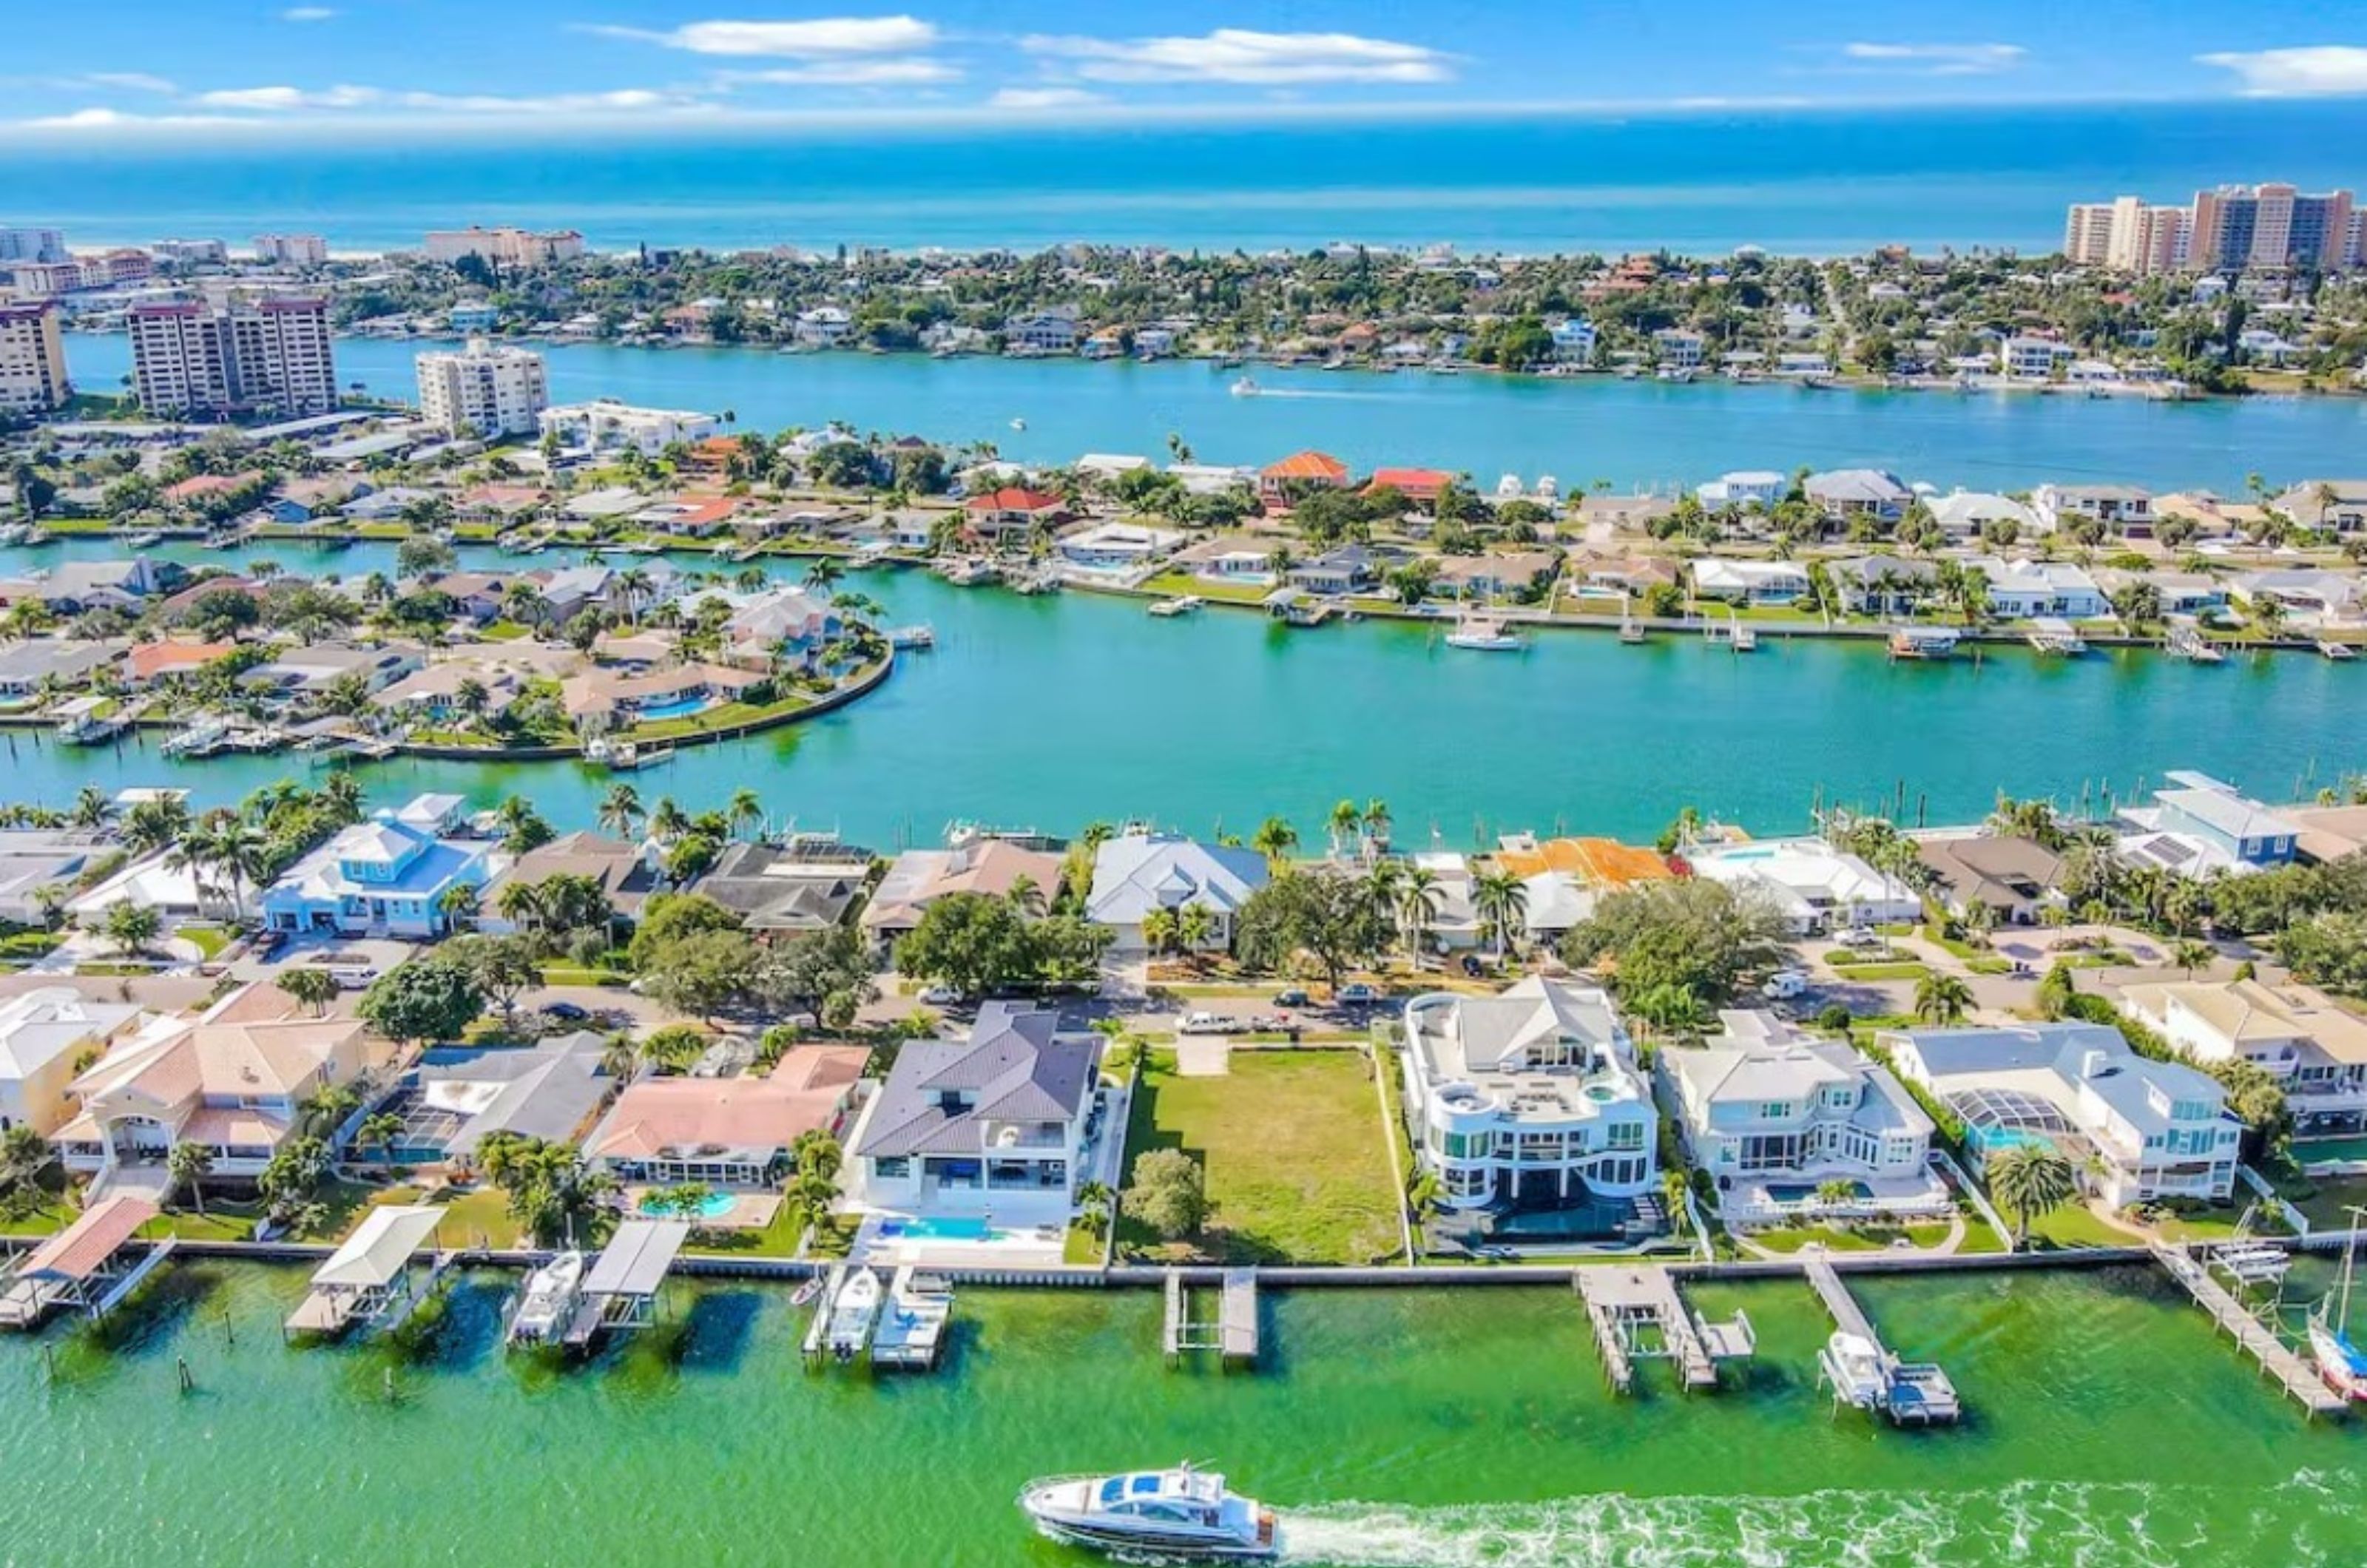 Clearwater Beach Vacation Homes - https://www.beachguide.com/clearwater-beach-vacation-rentals-clearwater-beach-vacation-homes-9669910.jpg?width=185&height=185